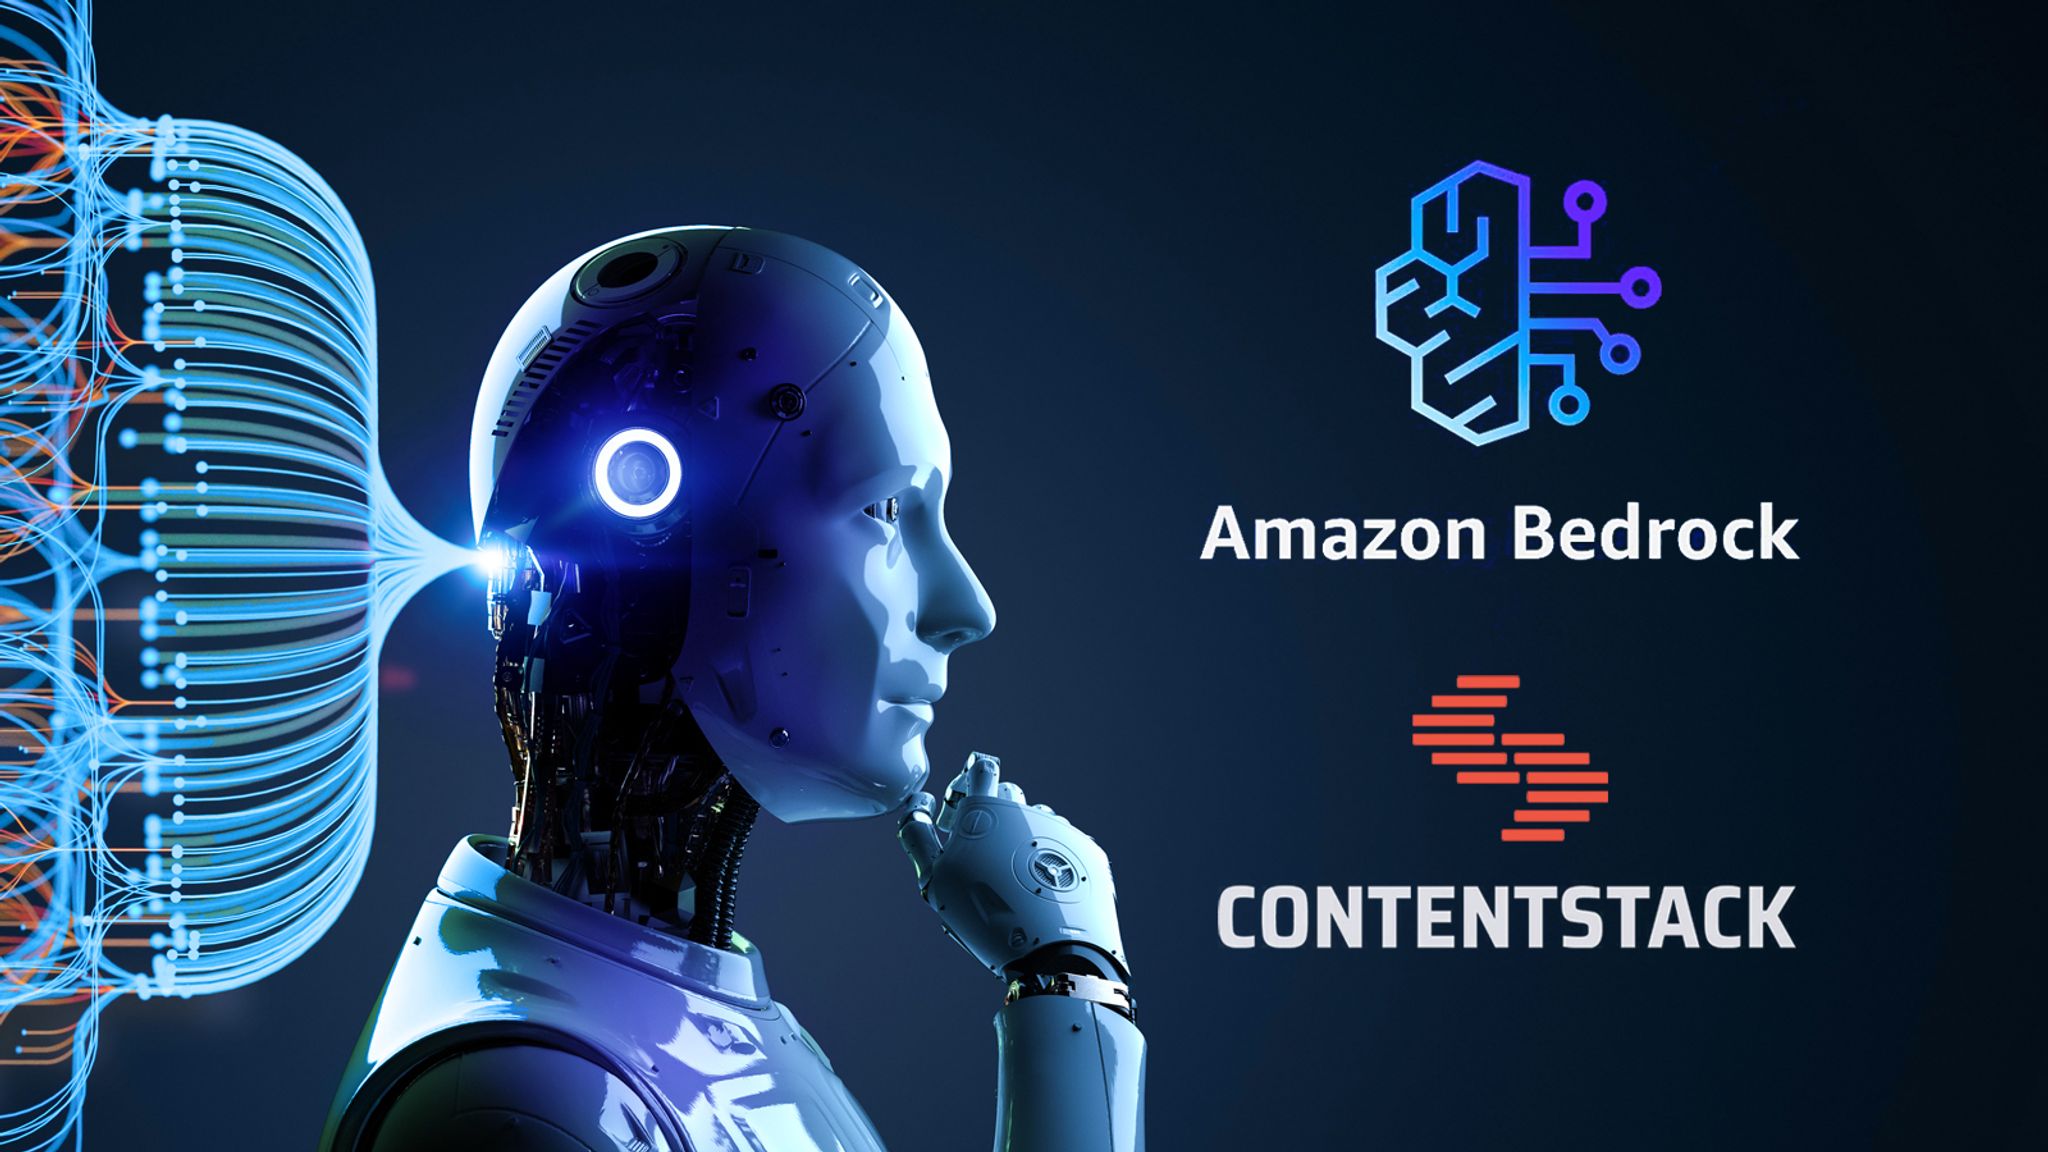 AI robot with digital connections next to Amazon Bedrock and Contentstack logos